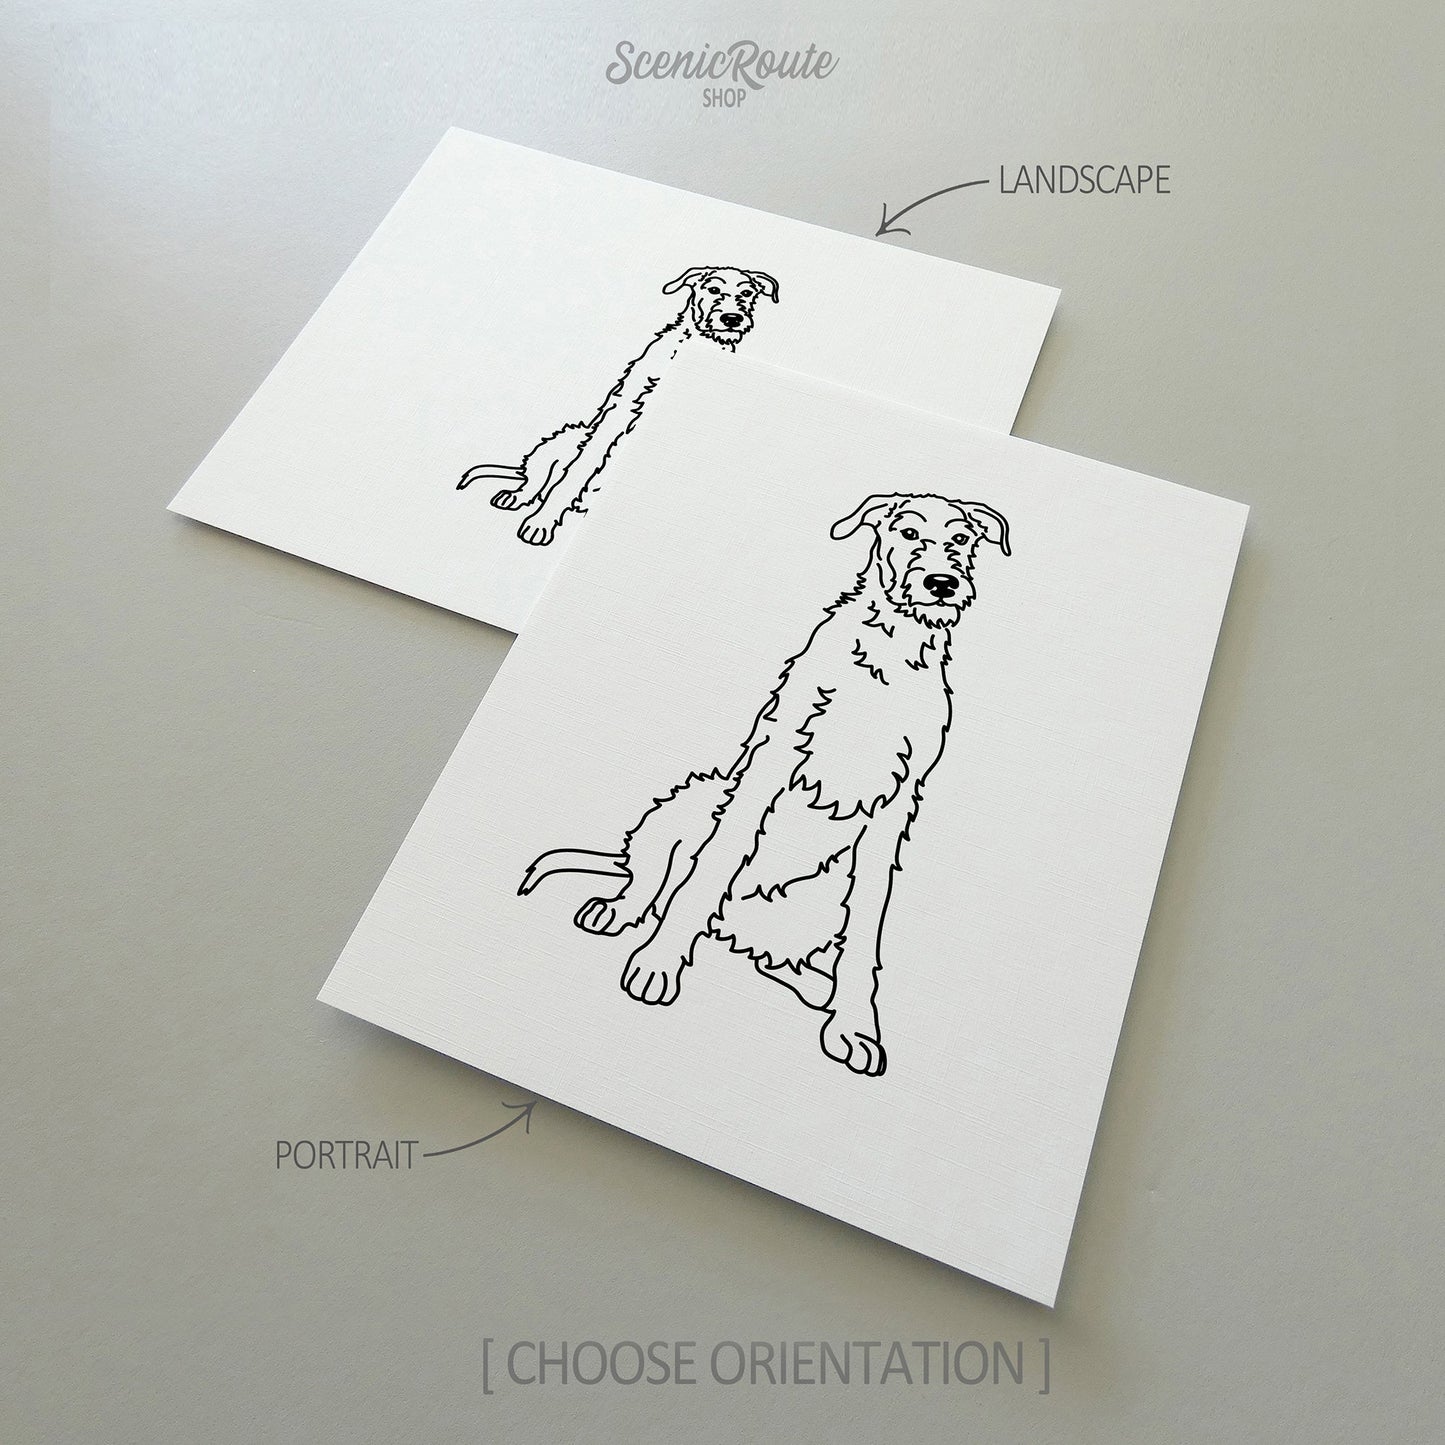 Two line art drawings of a Wolfhound dog on white linen paper with a gray background.  The pieces are shown in portrait and landscape orientation for the available art print options.